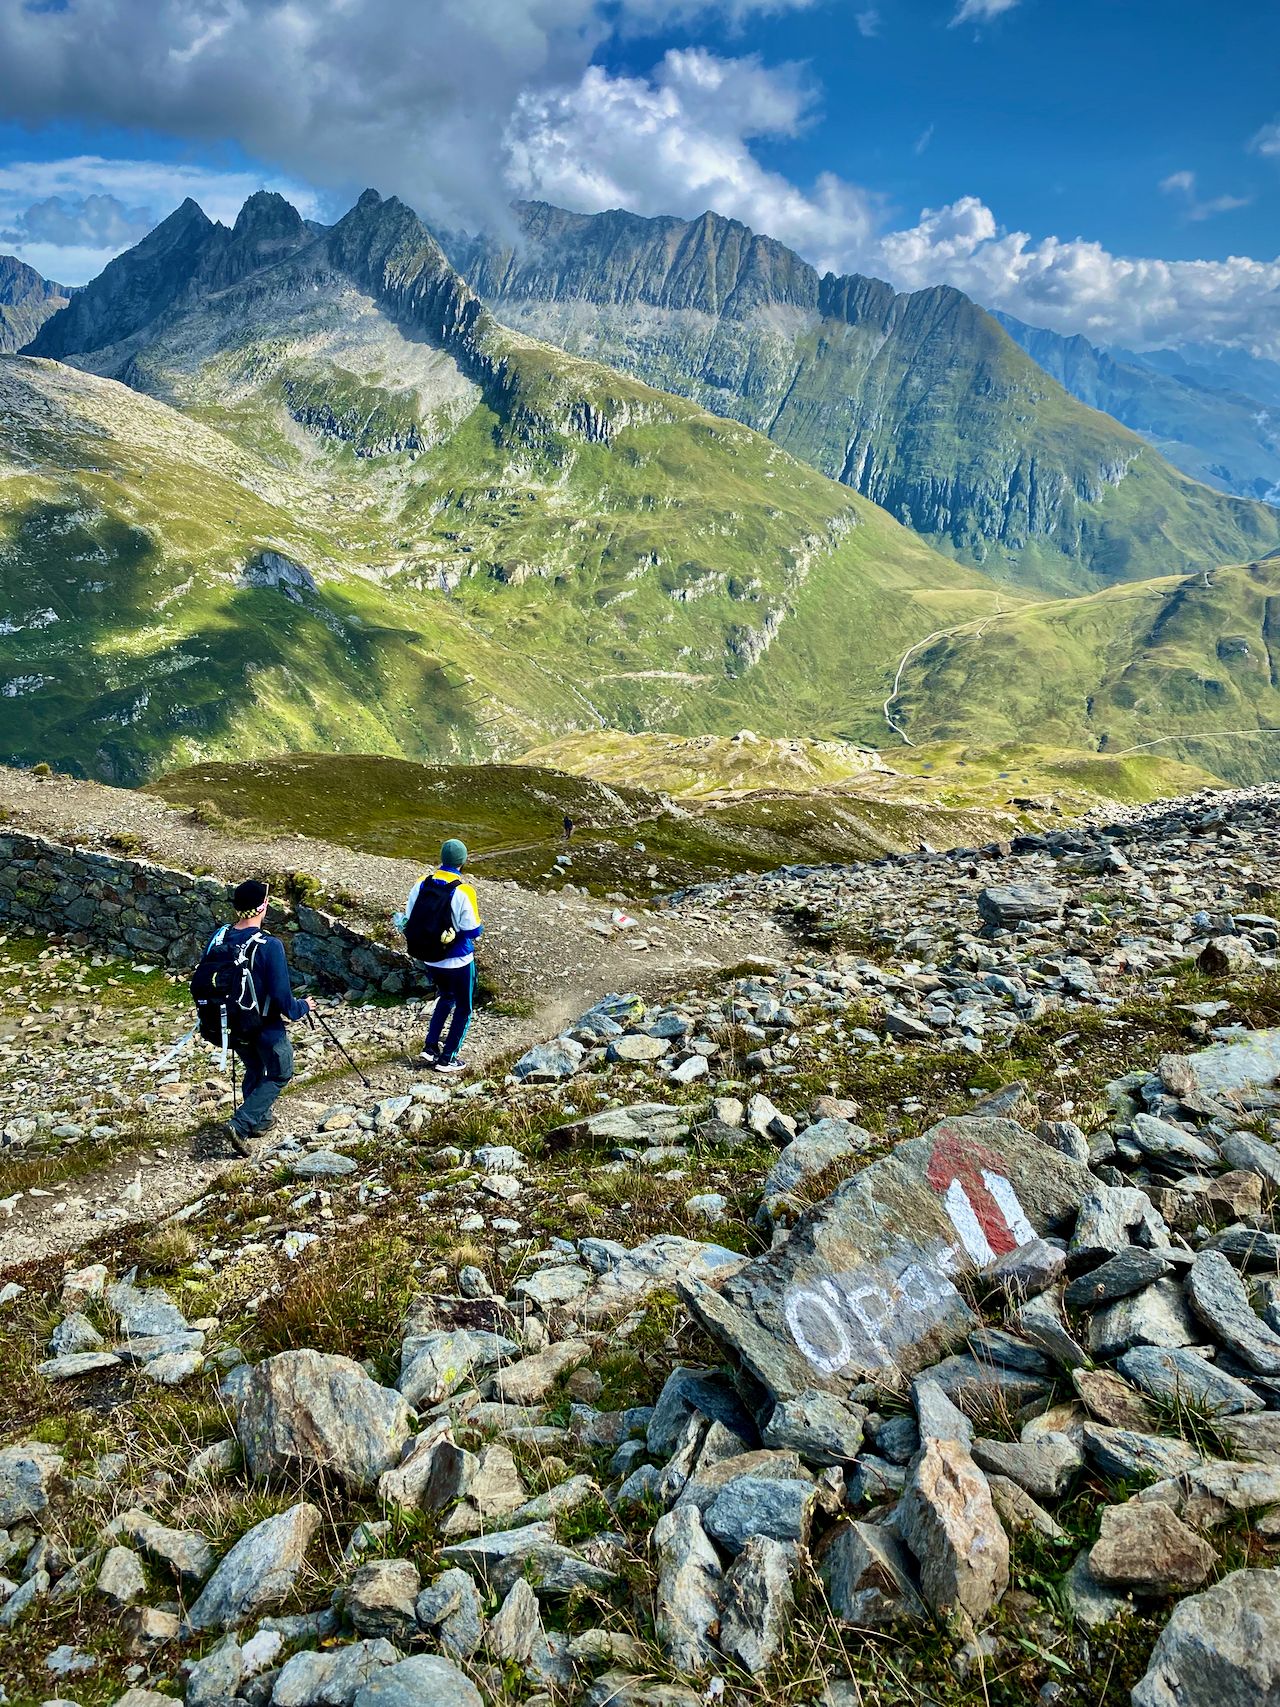 A wide angle of the mountains with two men in the foreground walking downward along a path marked O'pass.